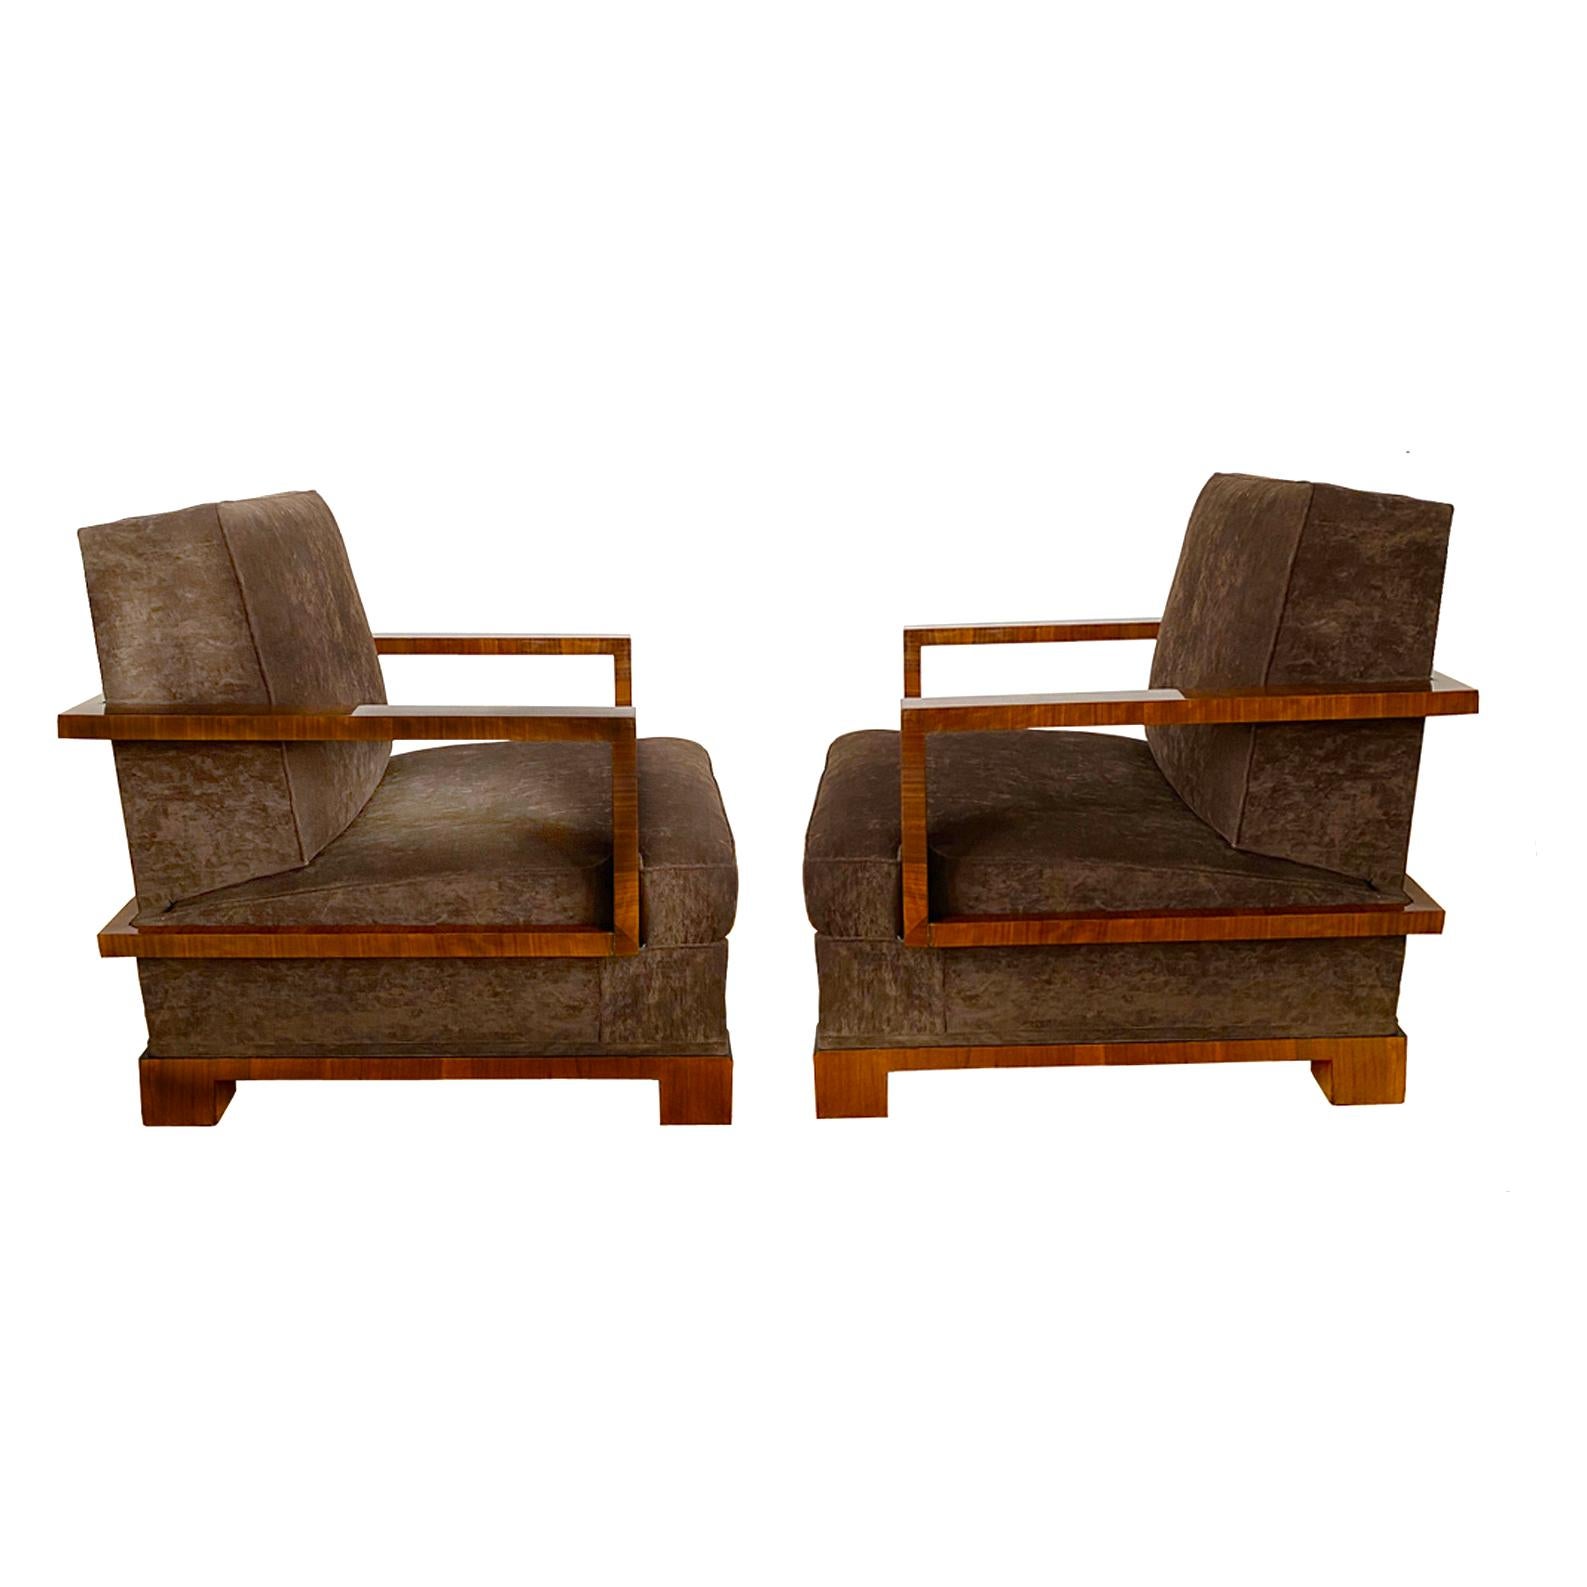 Osvaldo Borsani Elegant pair of lounge chairs and ottomans for RACI, Italy 1930
A beautiful and rare pair of lounge chairs with ottomans in walnut veneer and upholstered in high quality Brown Andro chenille fabric by Zimmer + Rohde.
All old